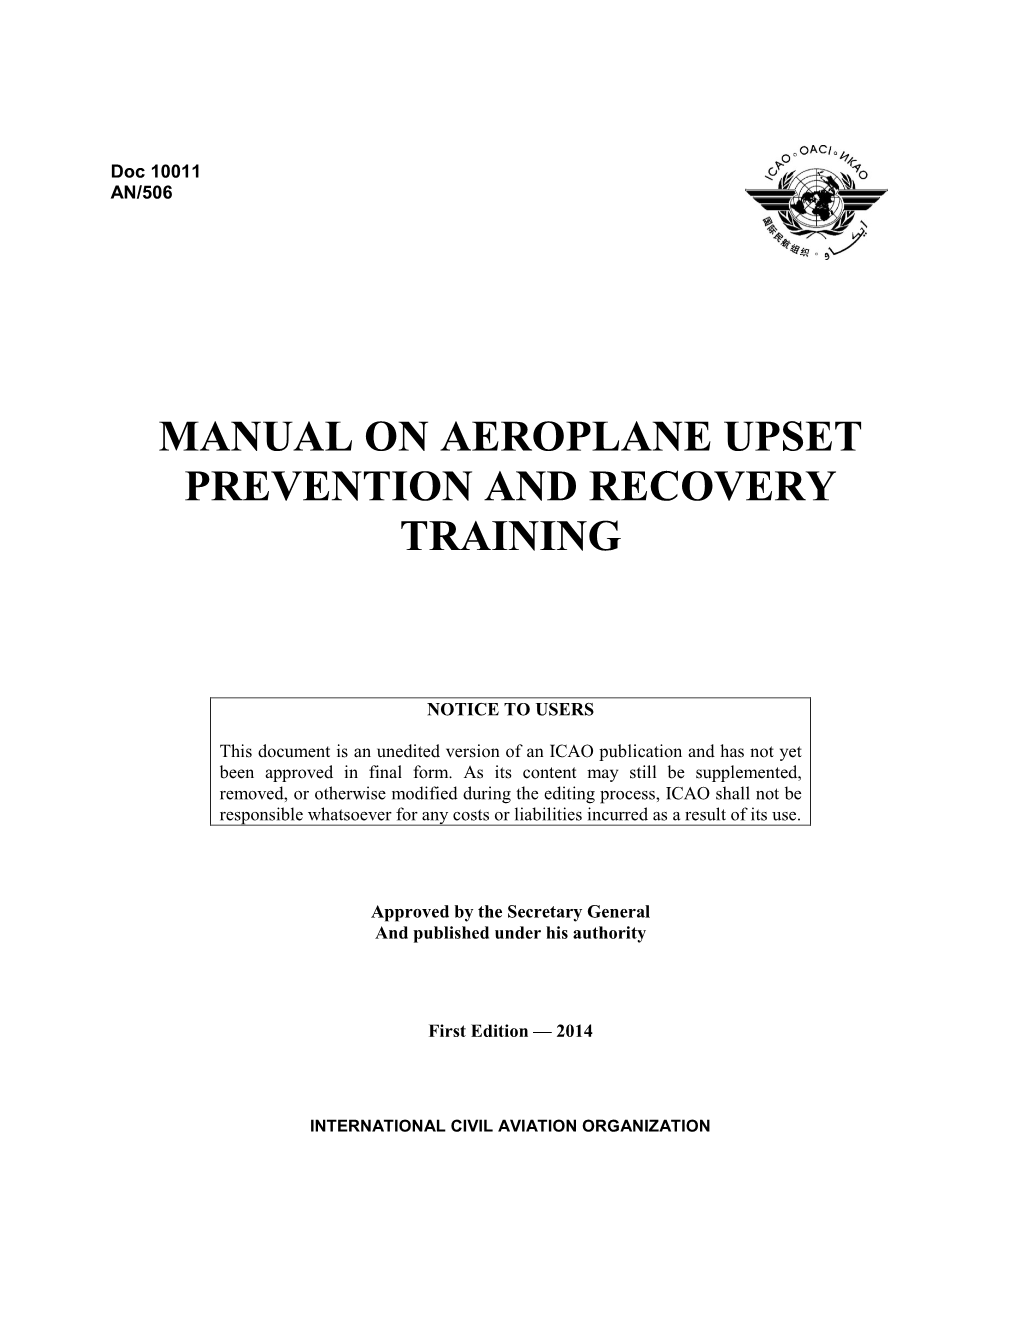 Manual on Aeroplane Upset Prevention and Recovery Training